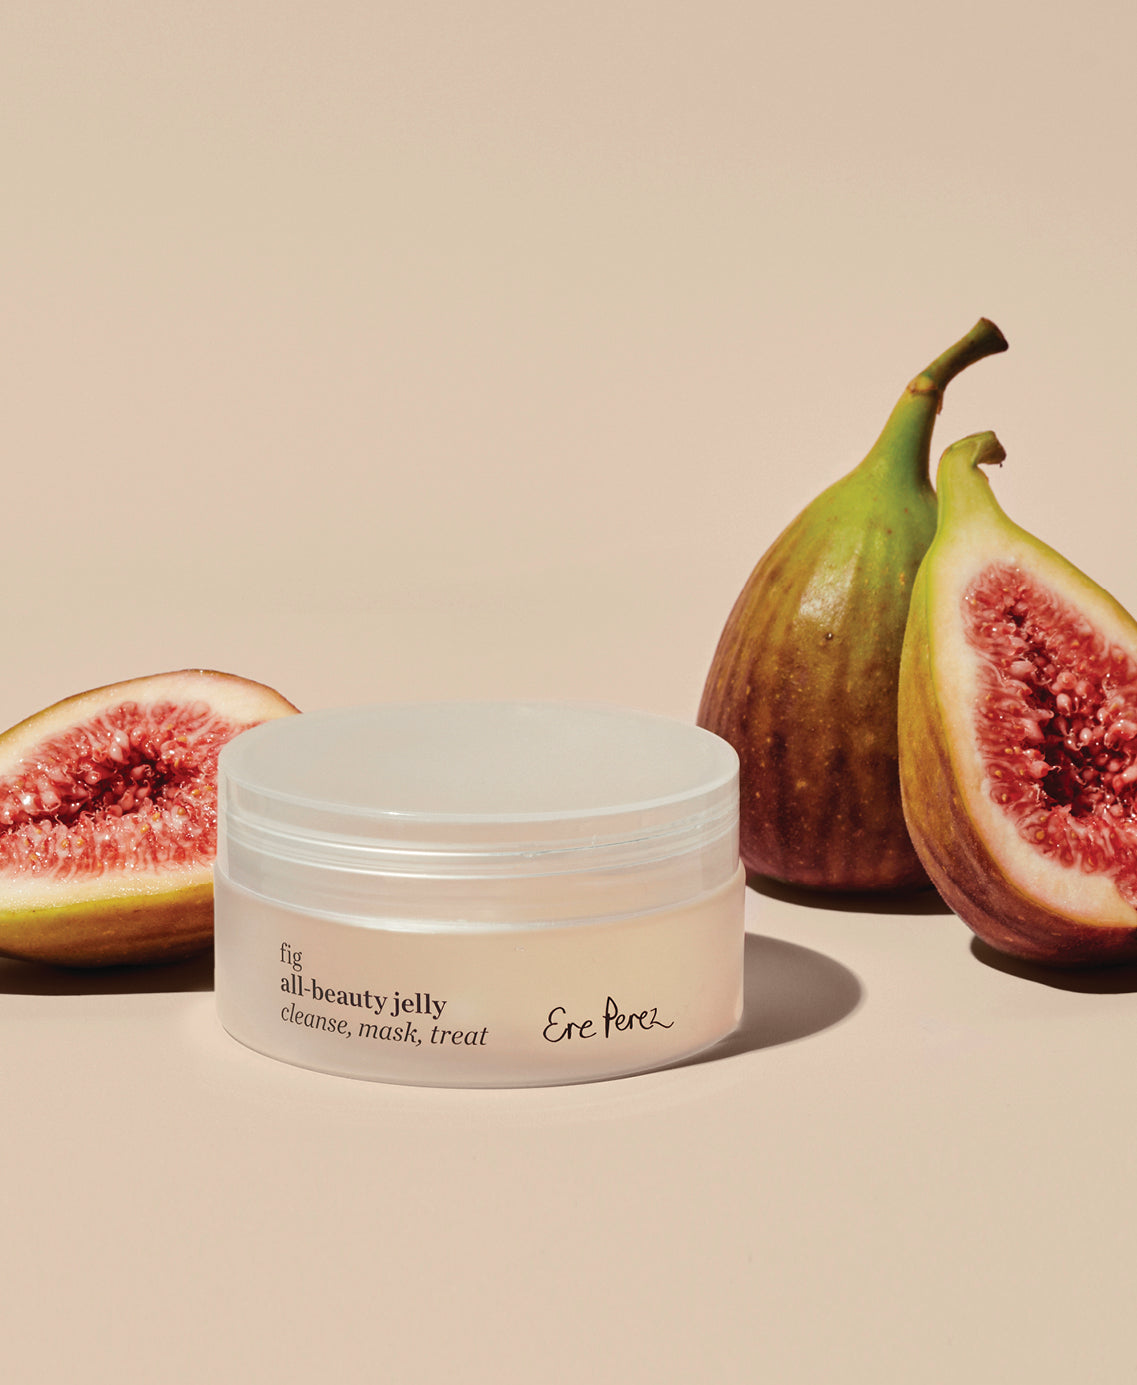 fig all-beauty jelly Ere Perez